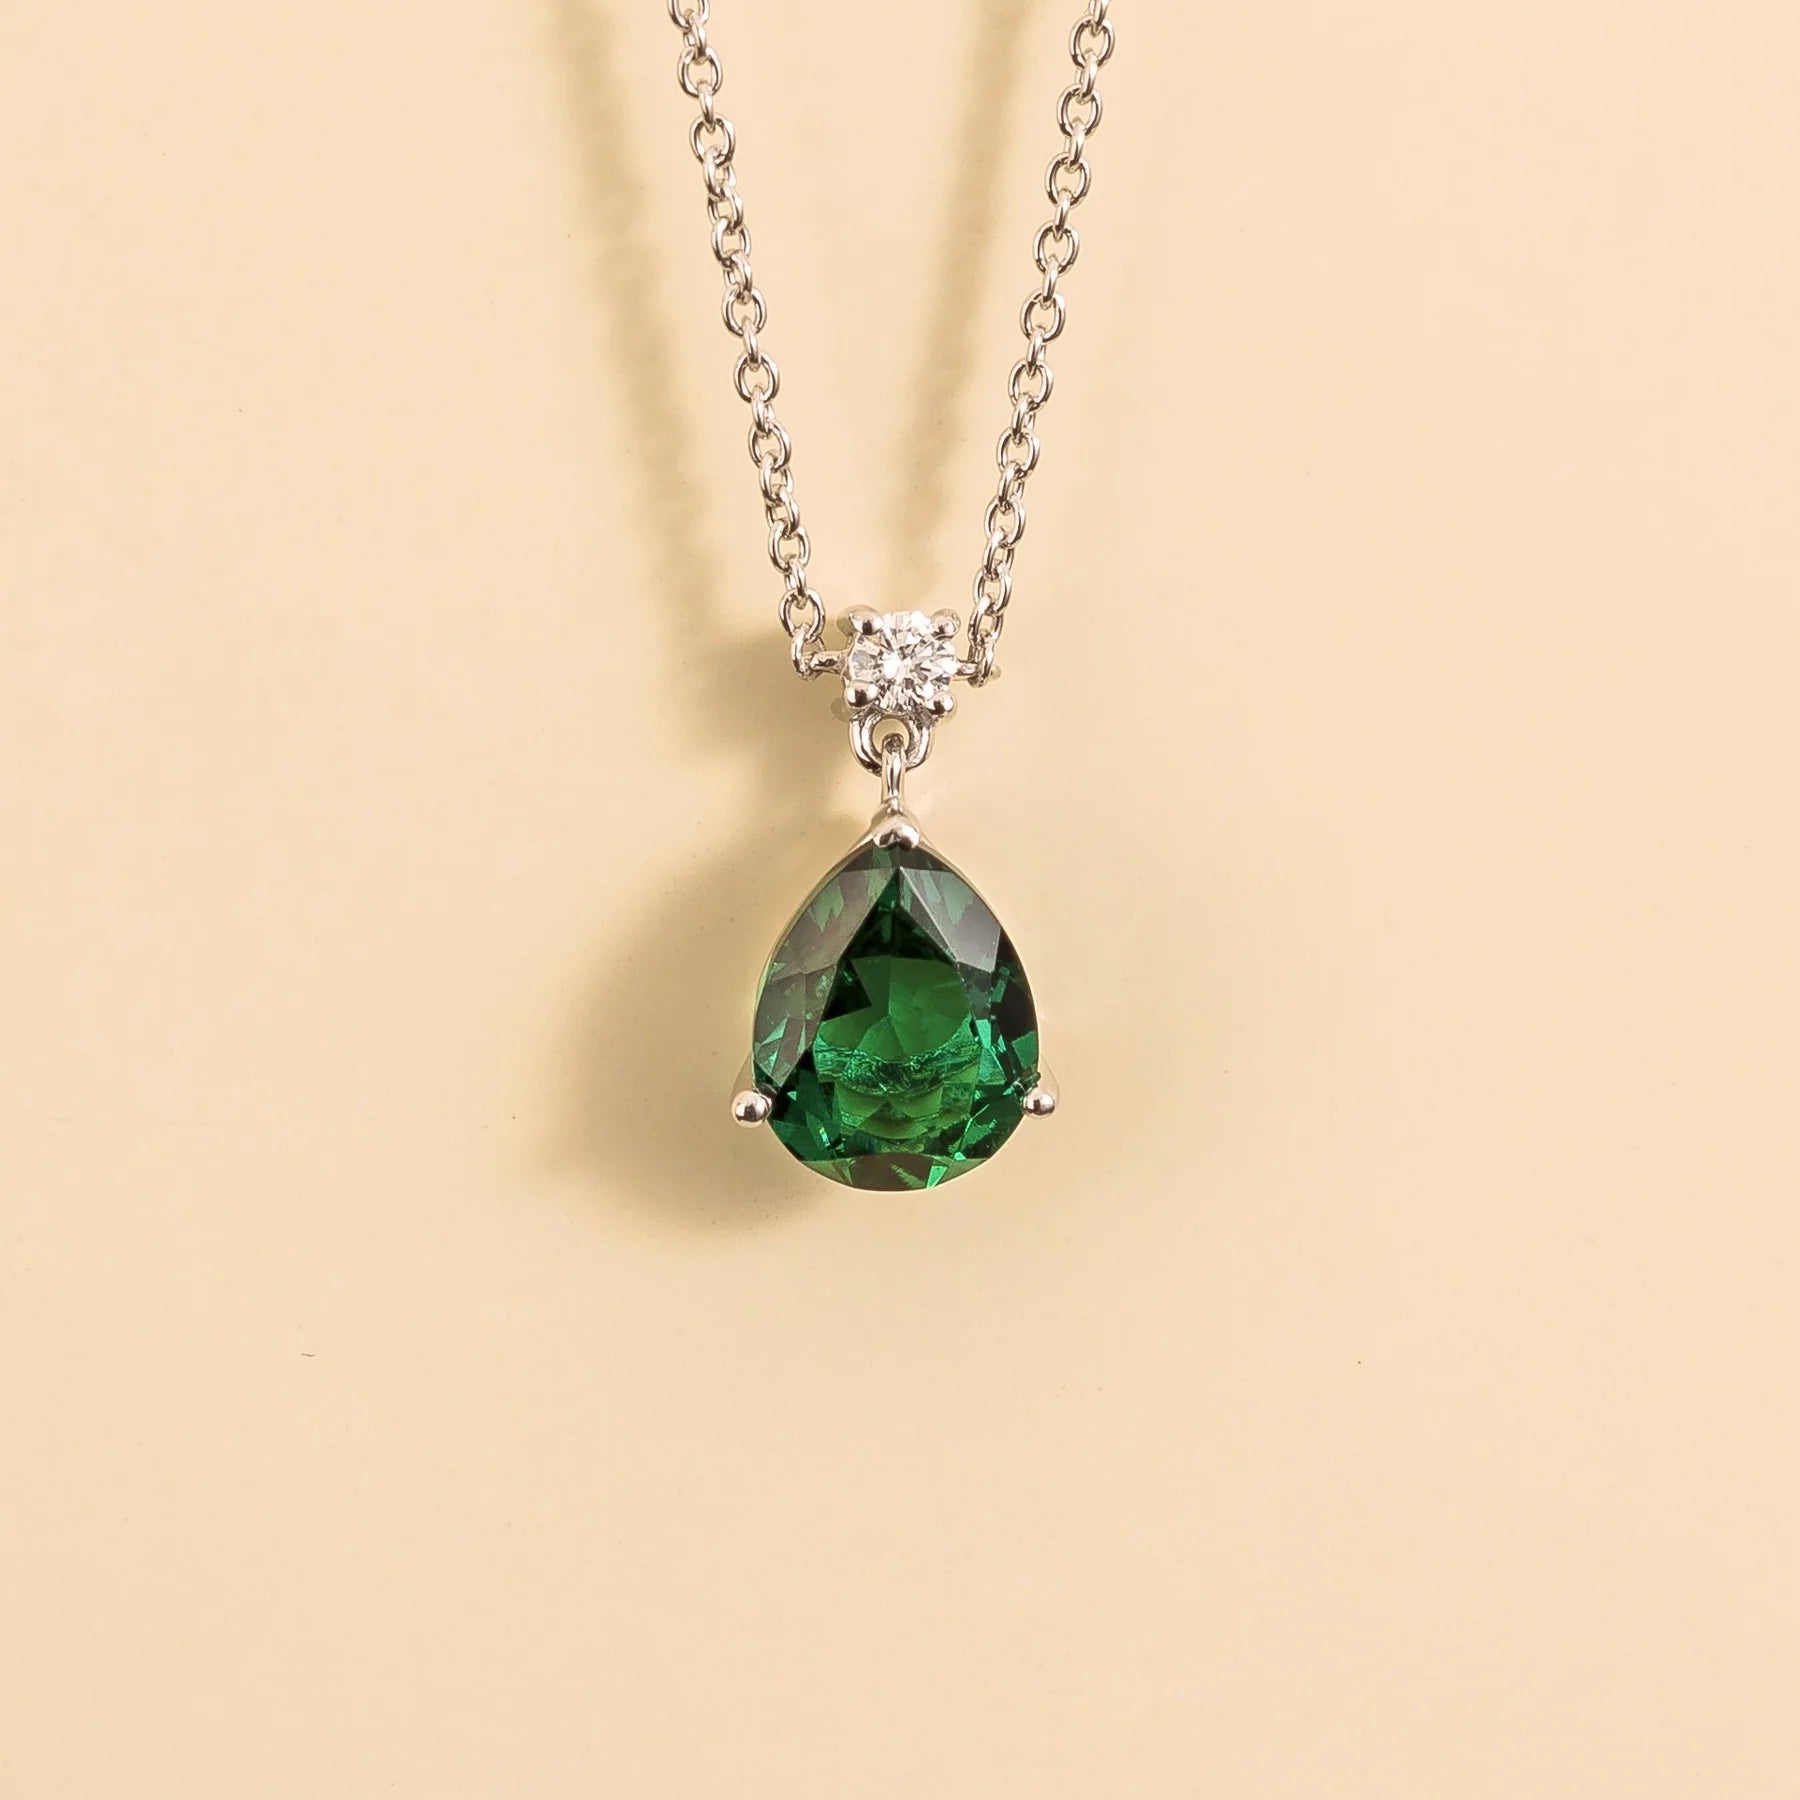 order online Ori medium pendant necklace in Emerald and Diamond set in White gold By Juvetti Online Jewellery London